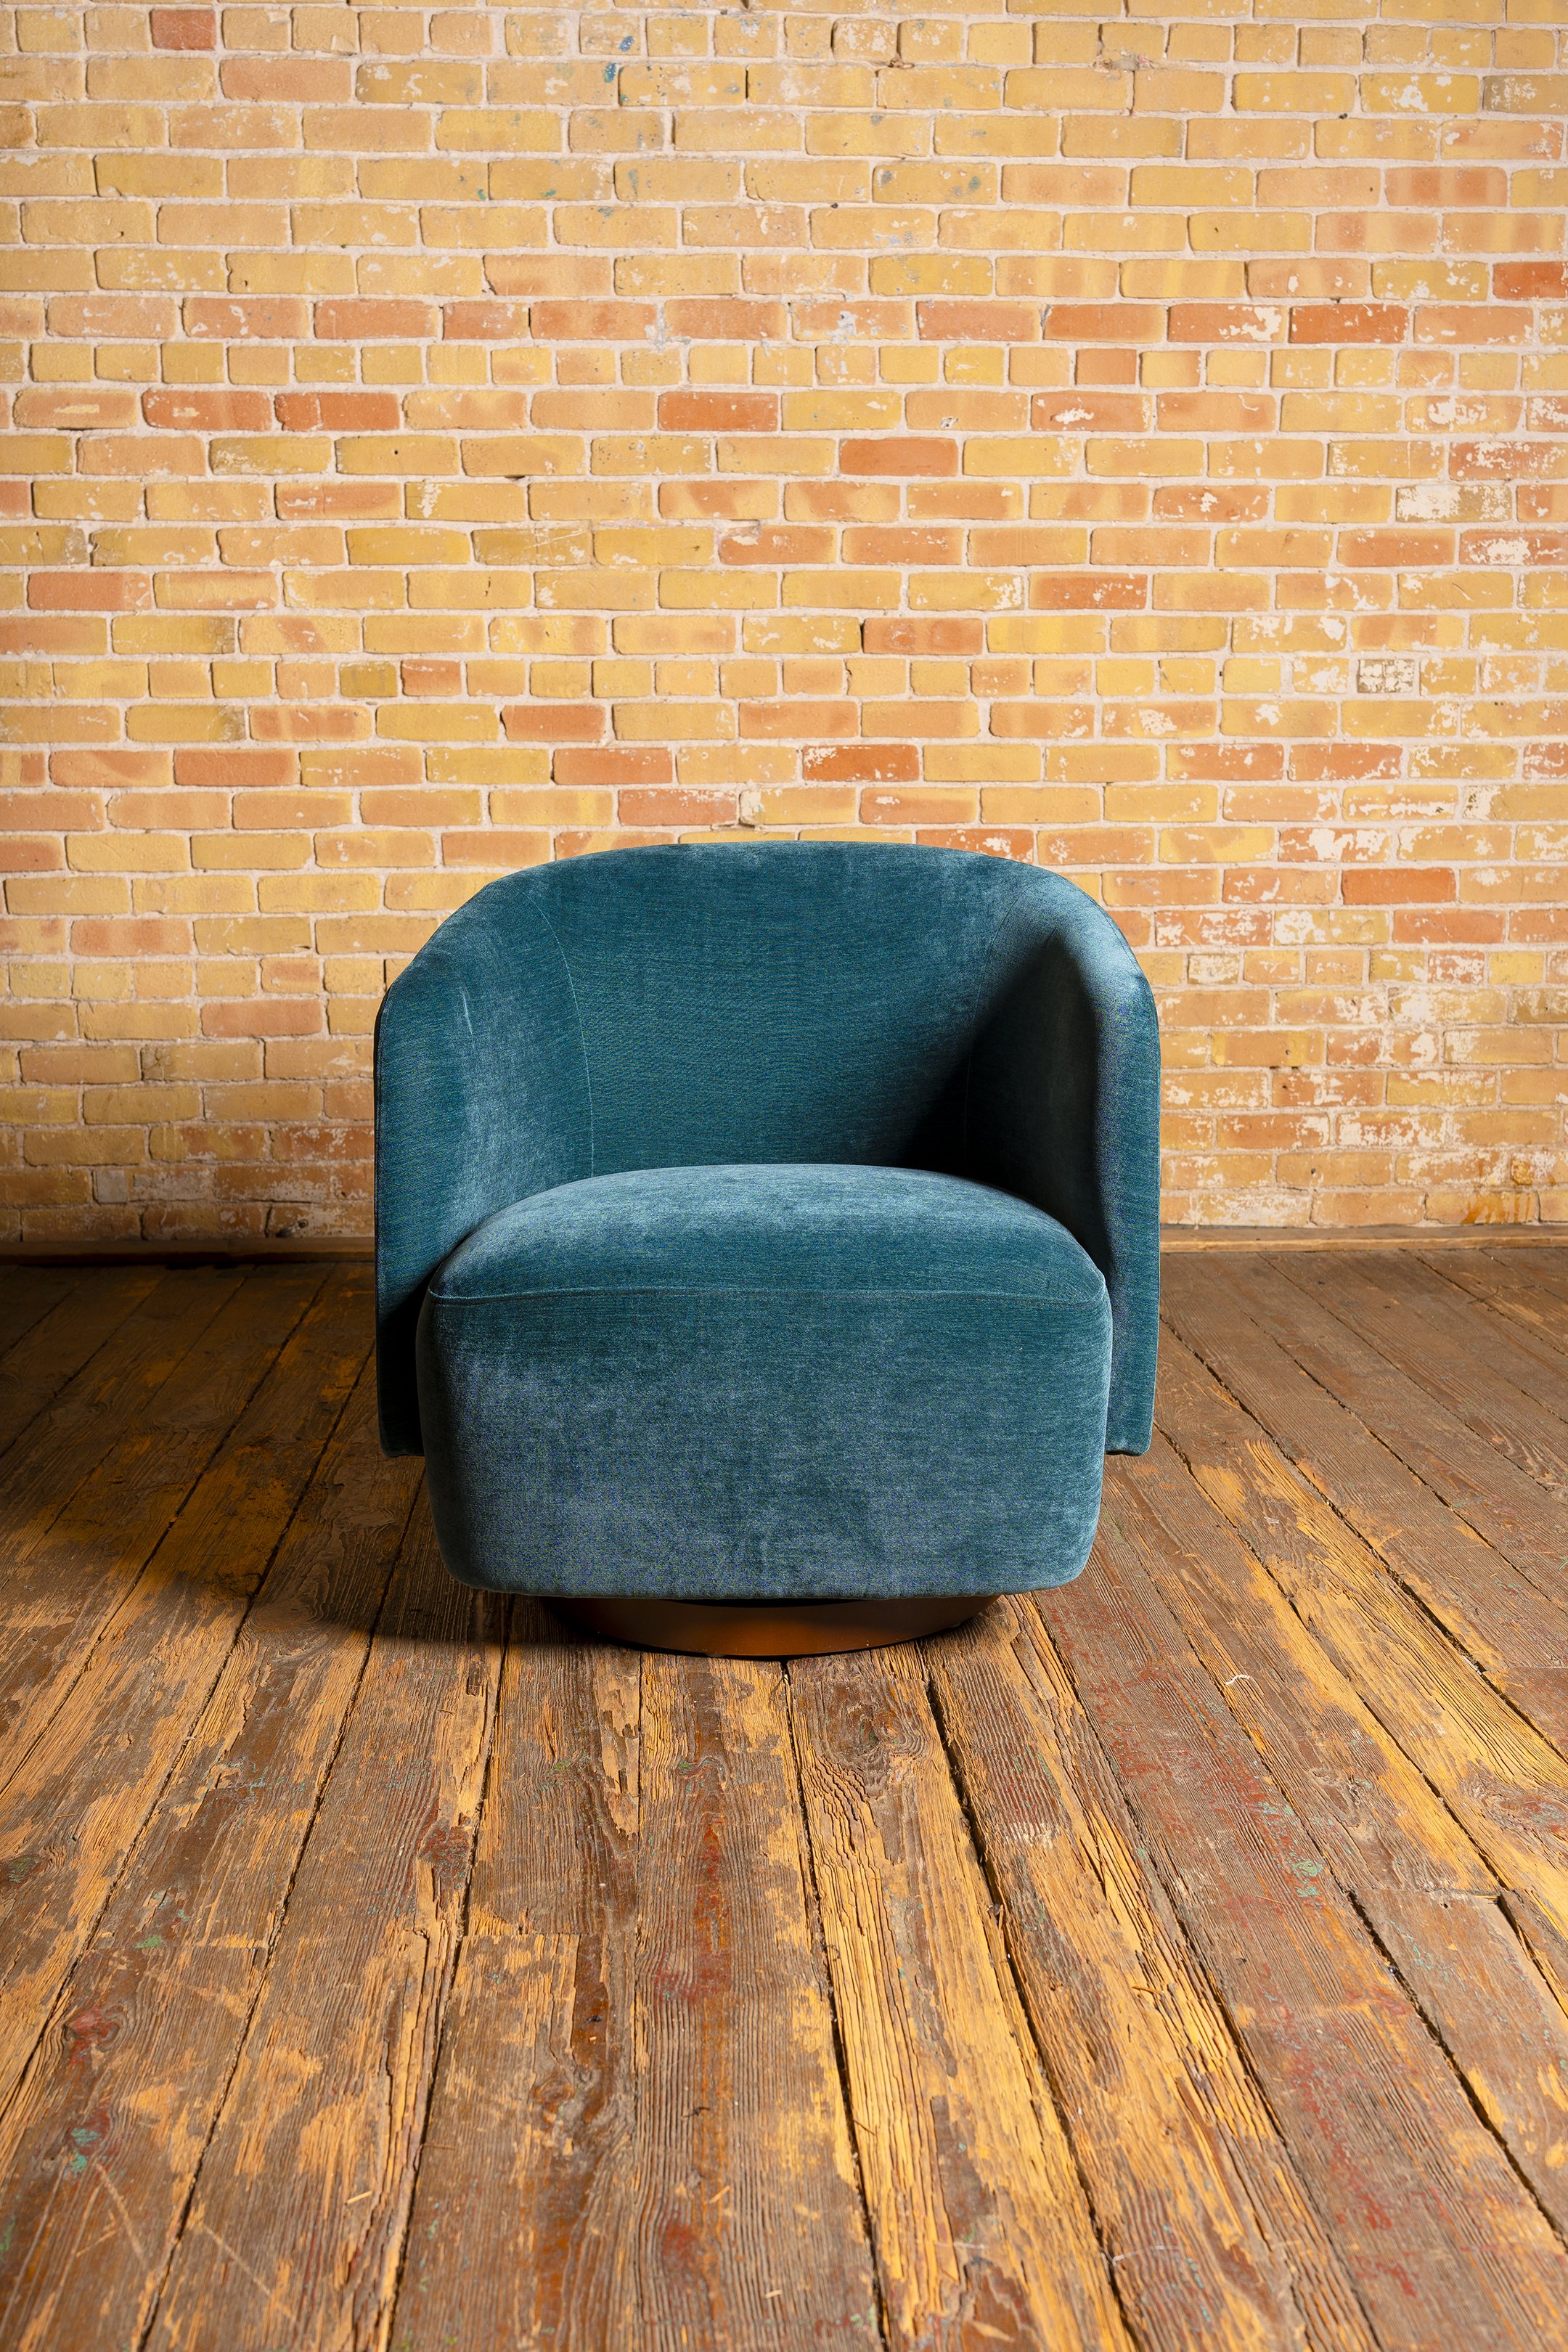 Teal Chair front.jpg